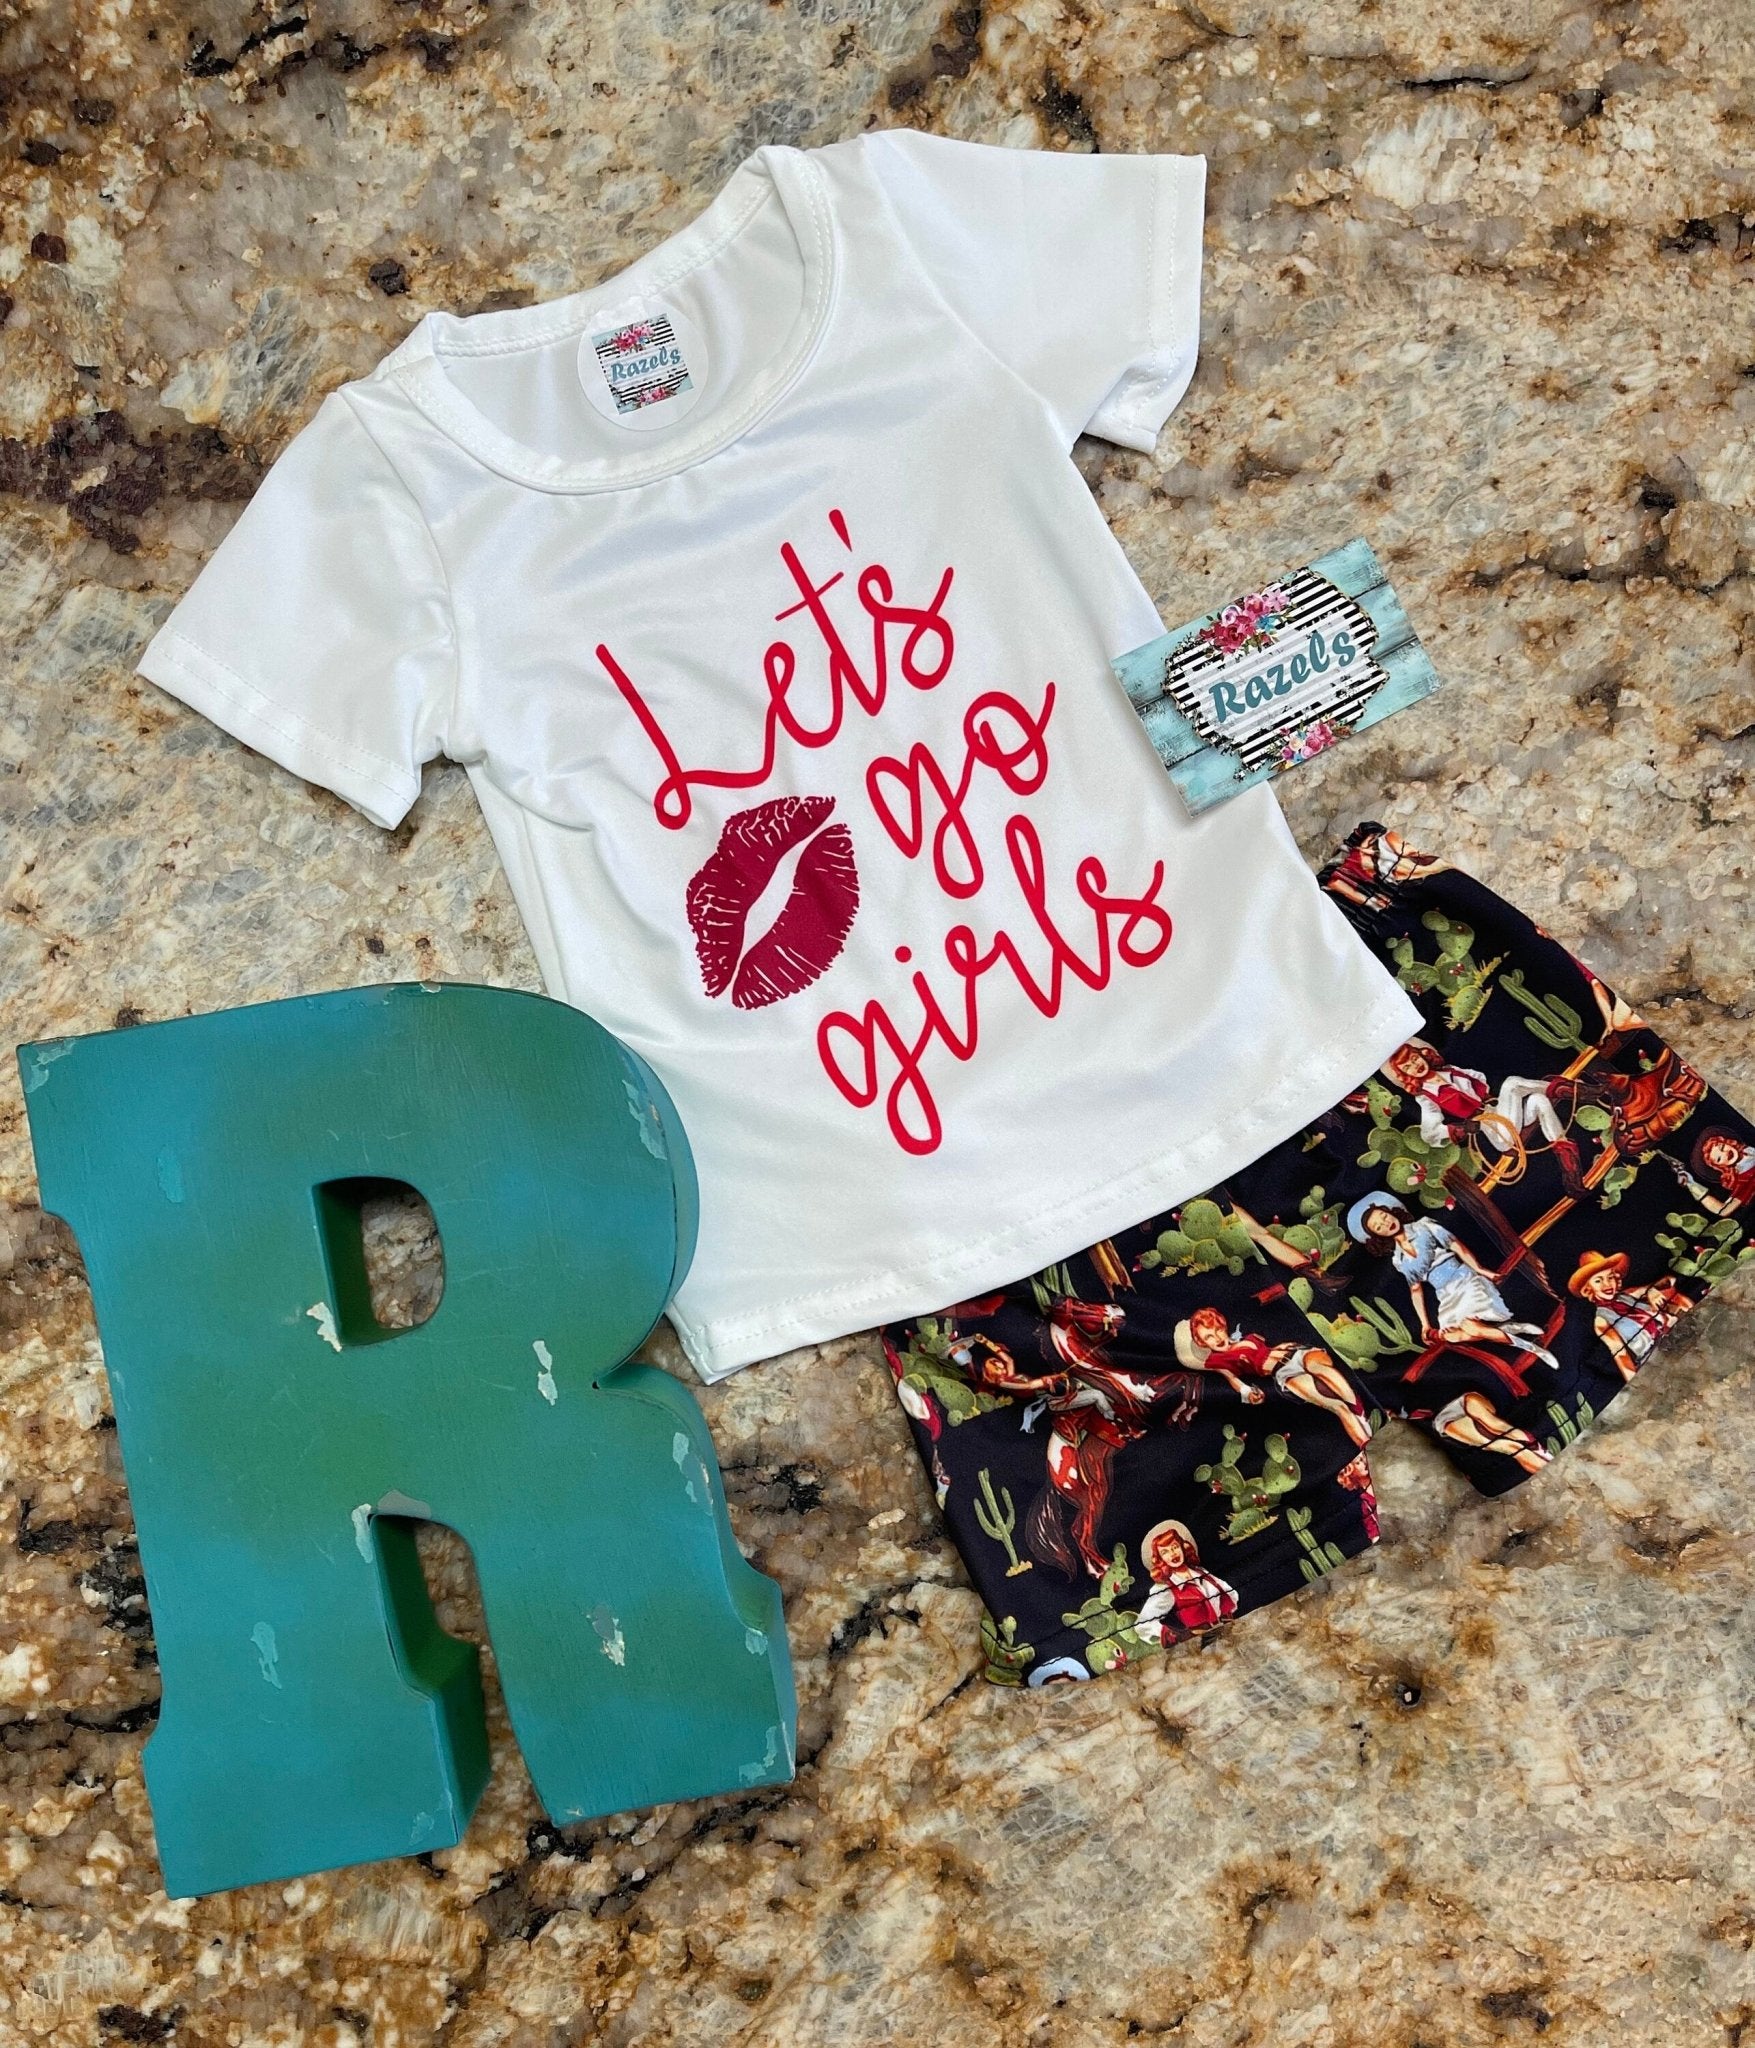 Let’s Go Girls Bell Bottom Outfit, VINTAGE COWGIRL Flares Tee - Razels